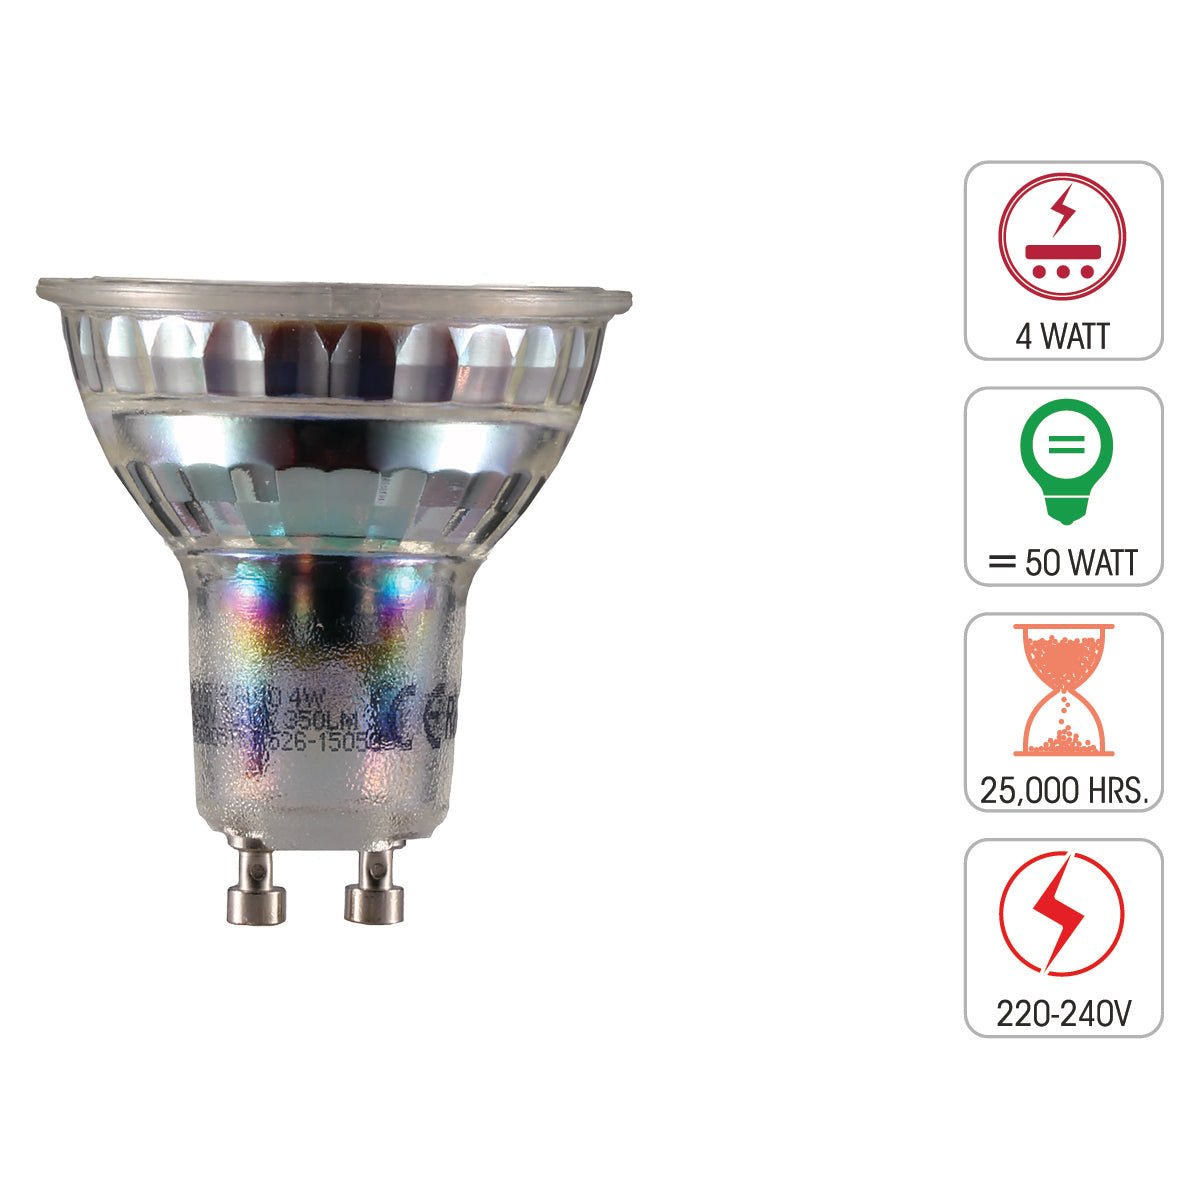 Technical specification of  crux led spot bulb mr16 gu10 4w 3000k warm white pack of 6/10